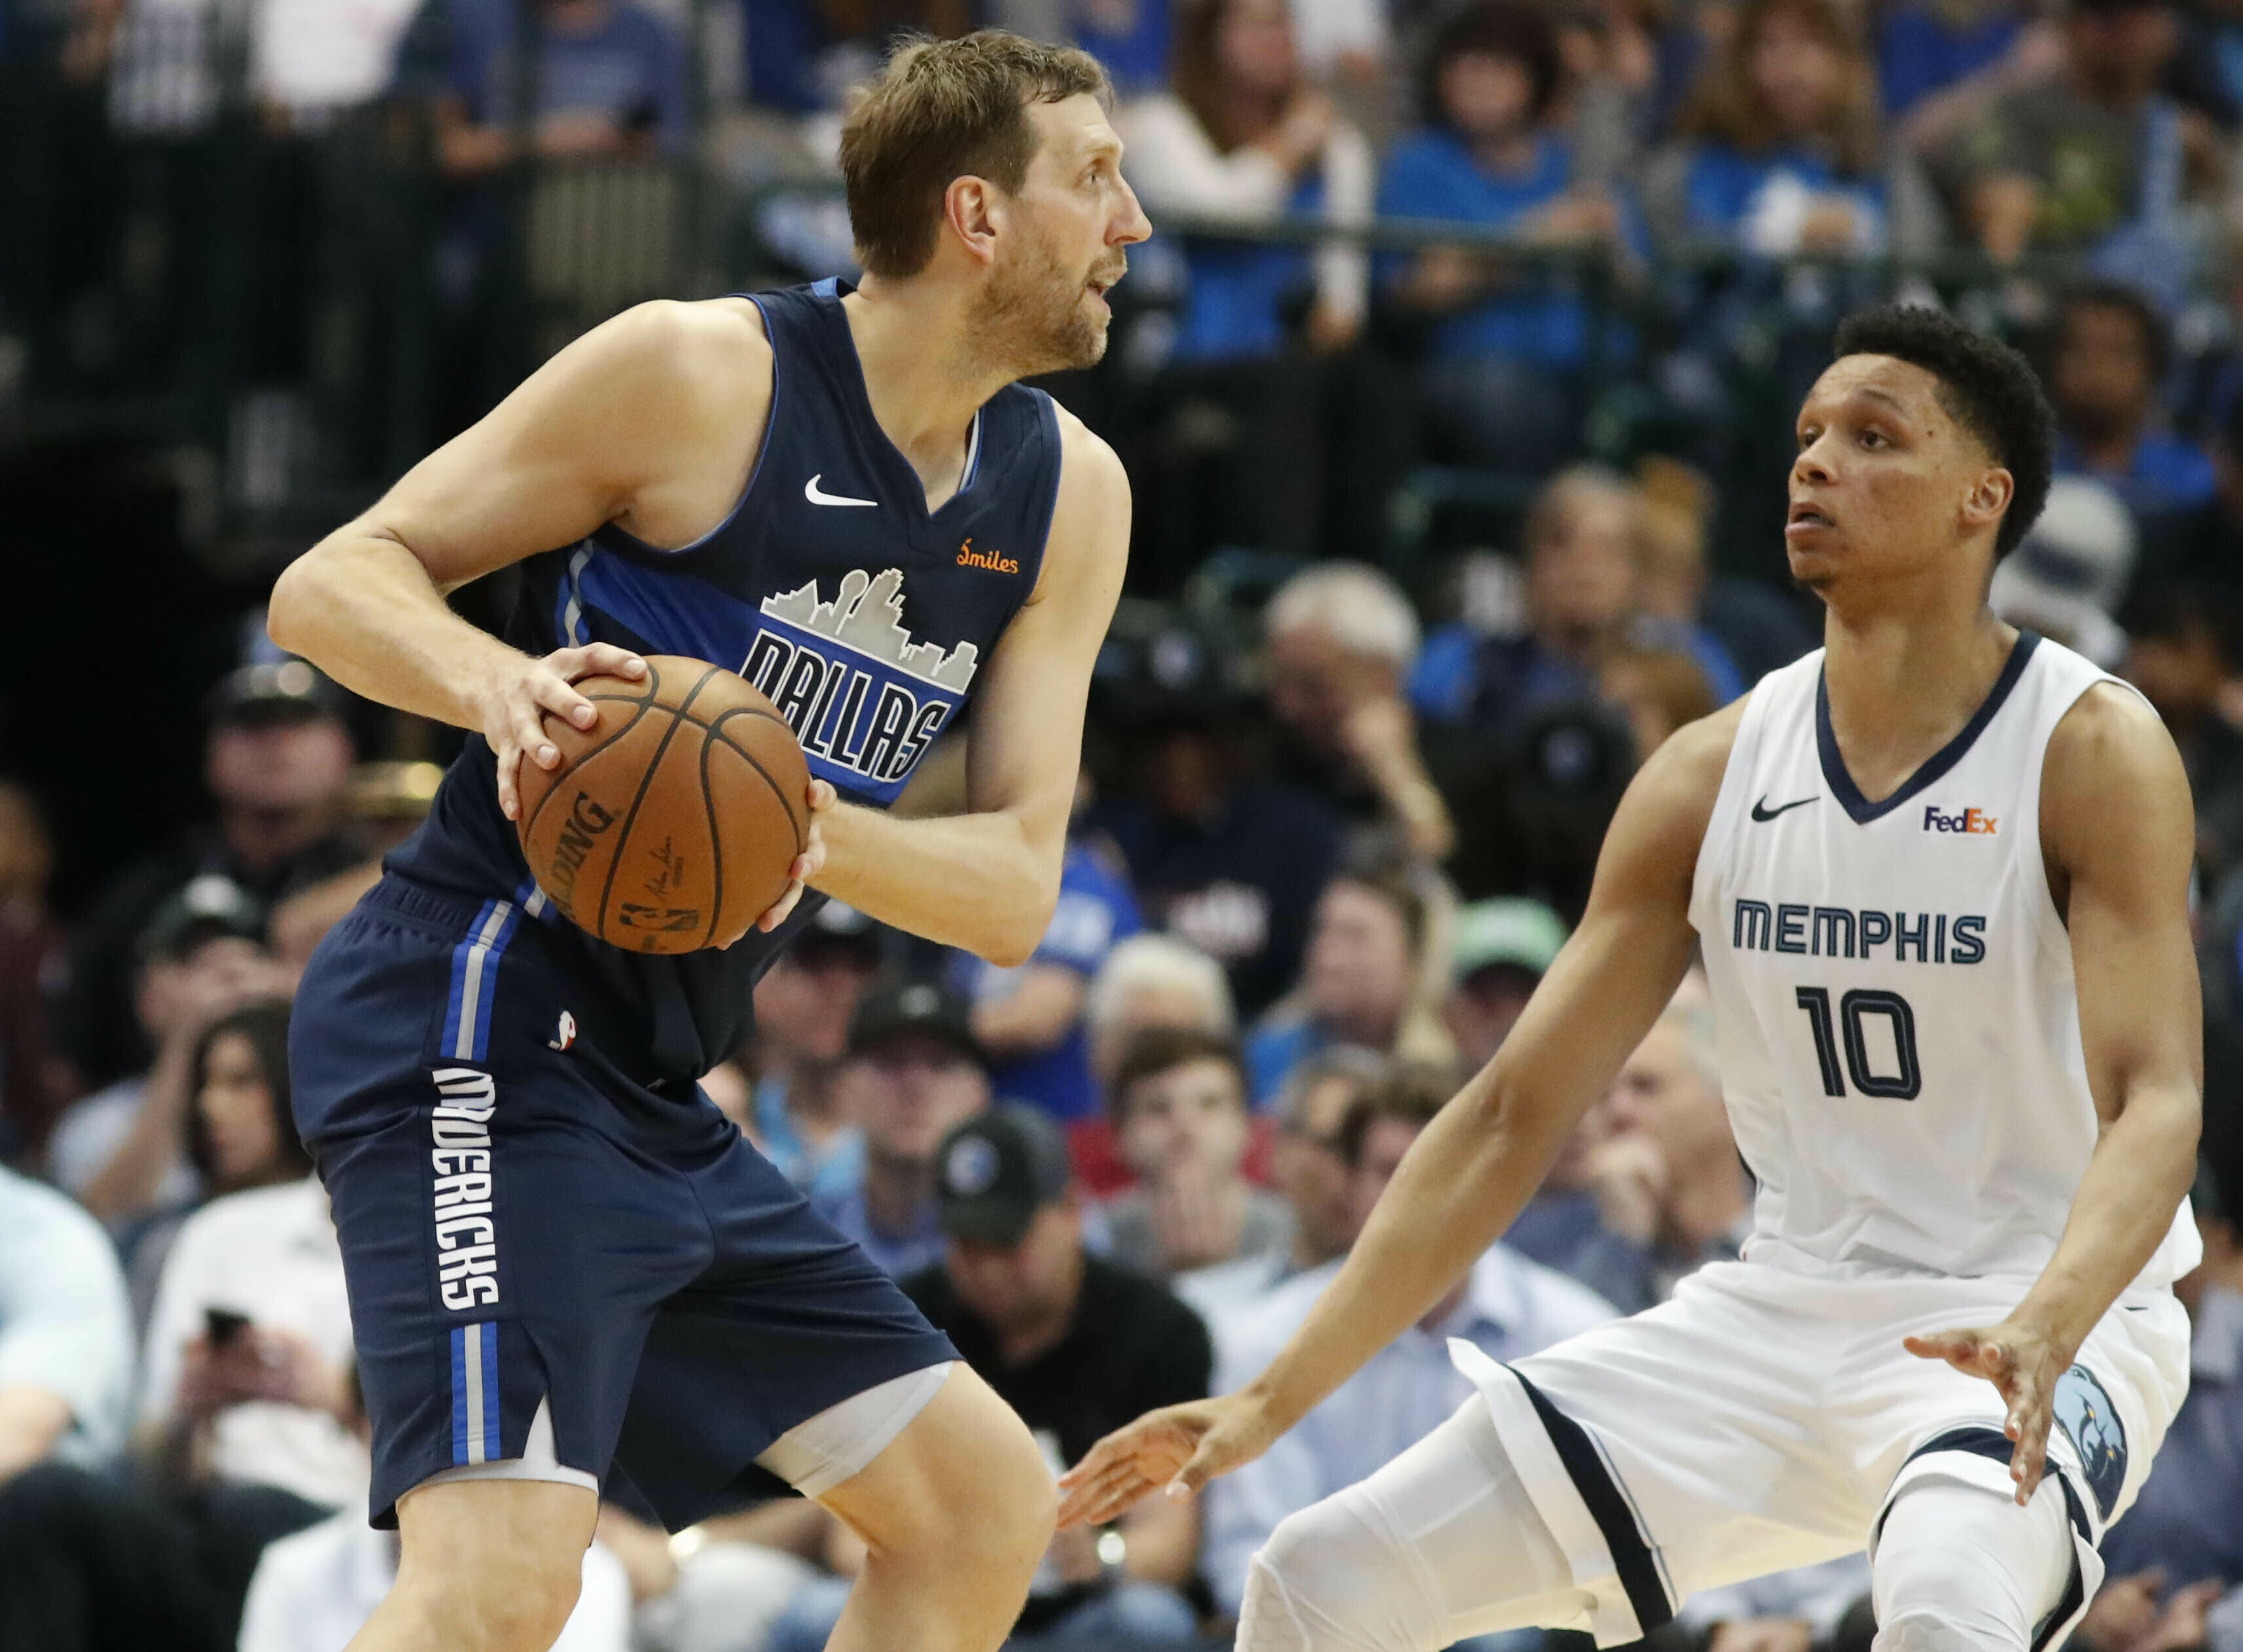 Wright trumps Dirk dunk to lift Grizzlies past Mavs 122-112